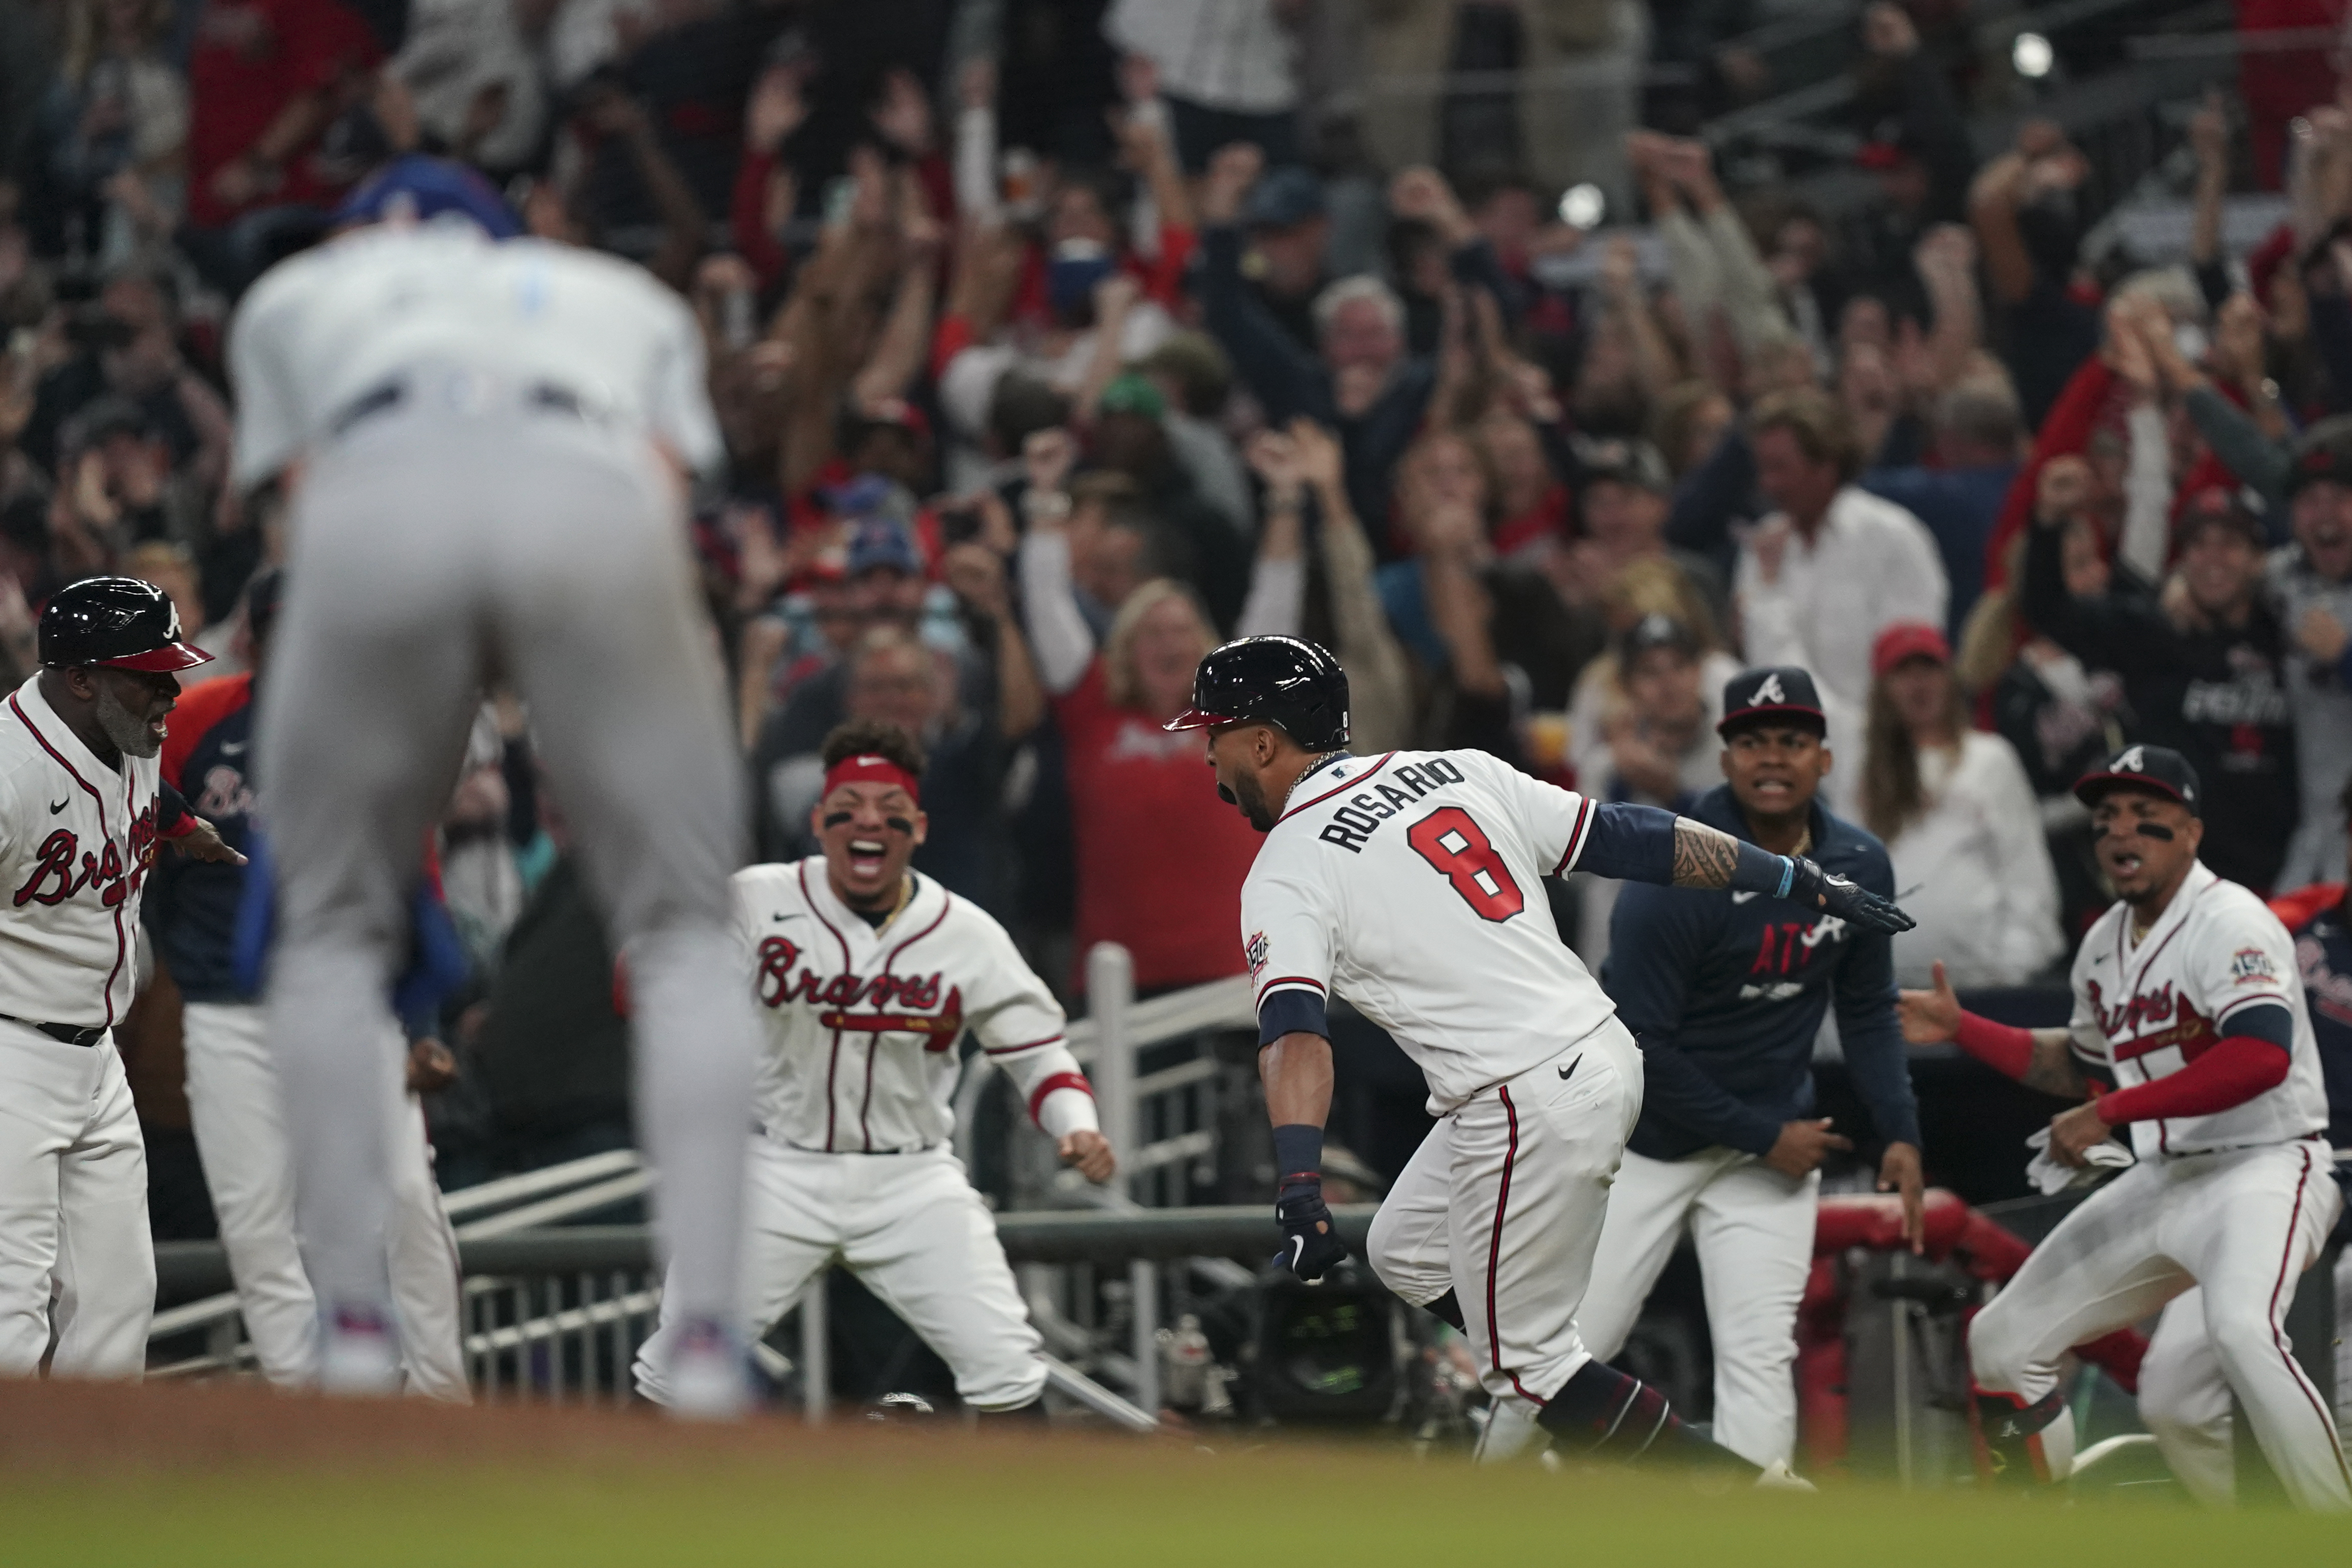 Atlanta earns first trip to World Series since 1999 after knocking off LA Dodgers in NLCS Game 6